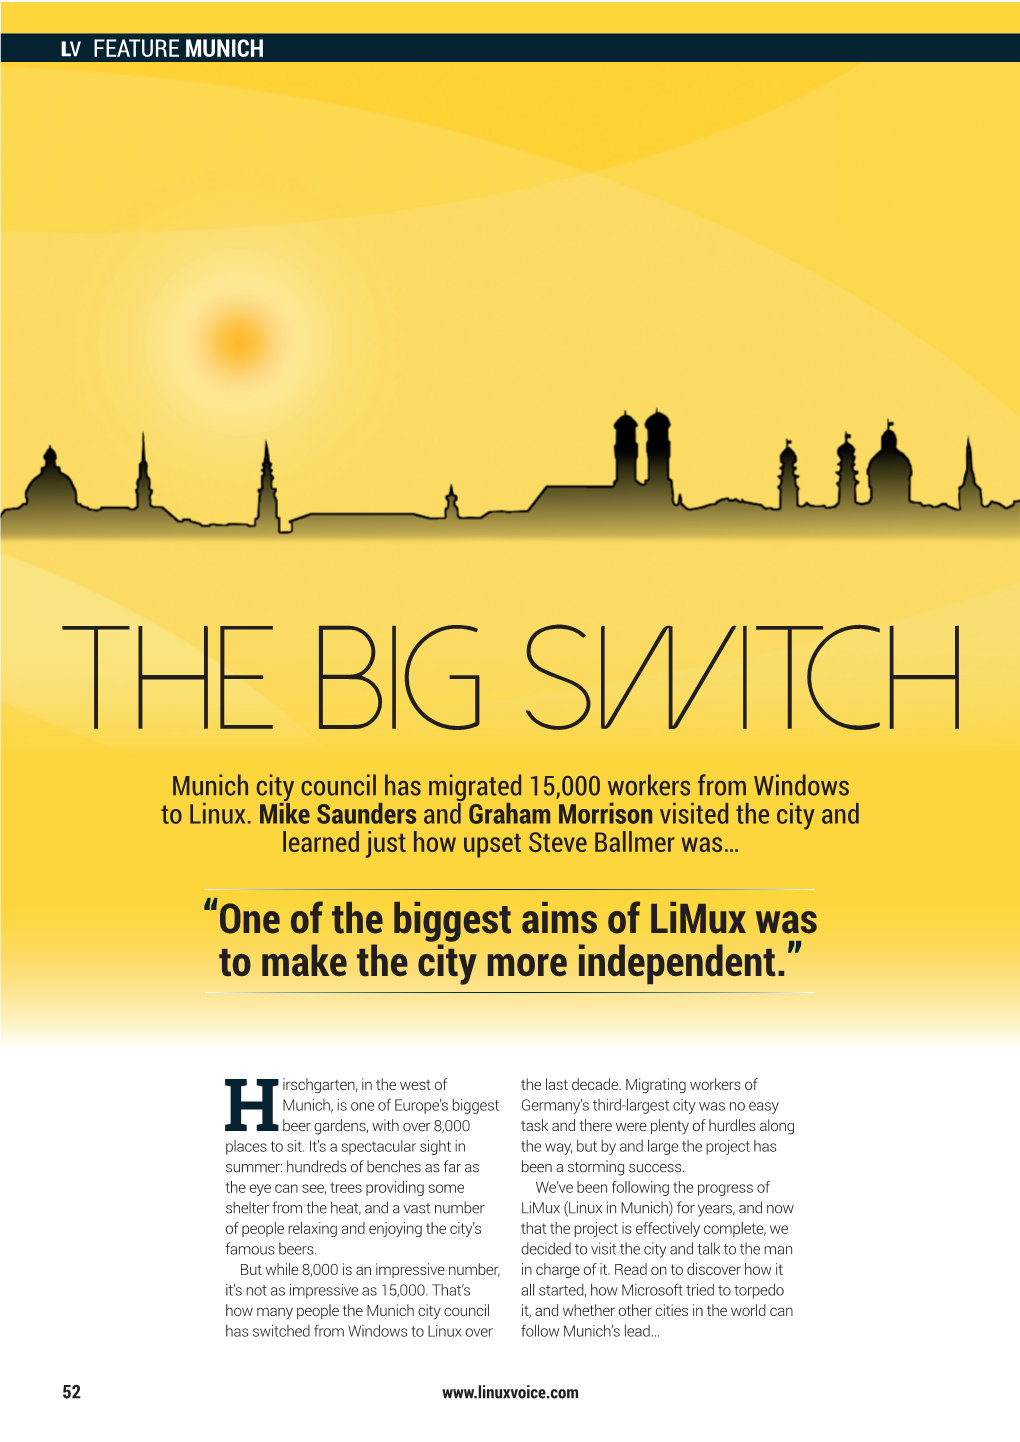 One of the Biggest Aims of Limux Was to Make the City More Independent.”